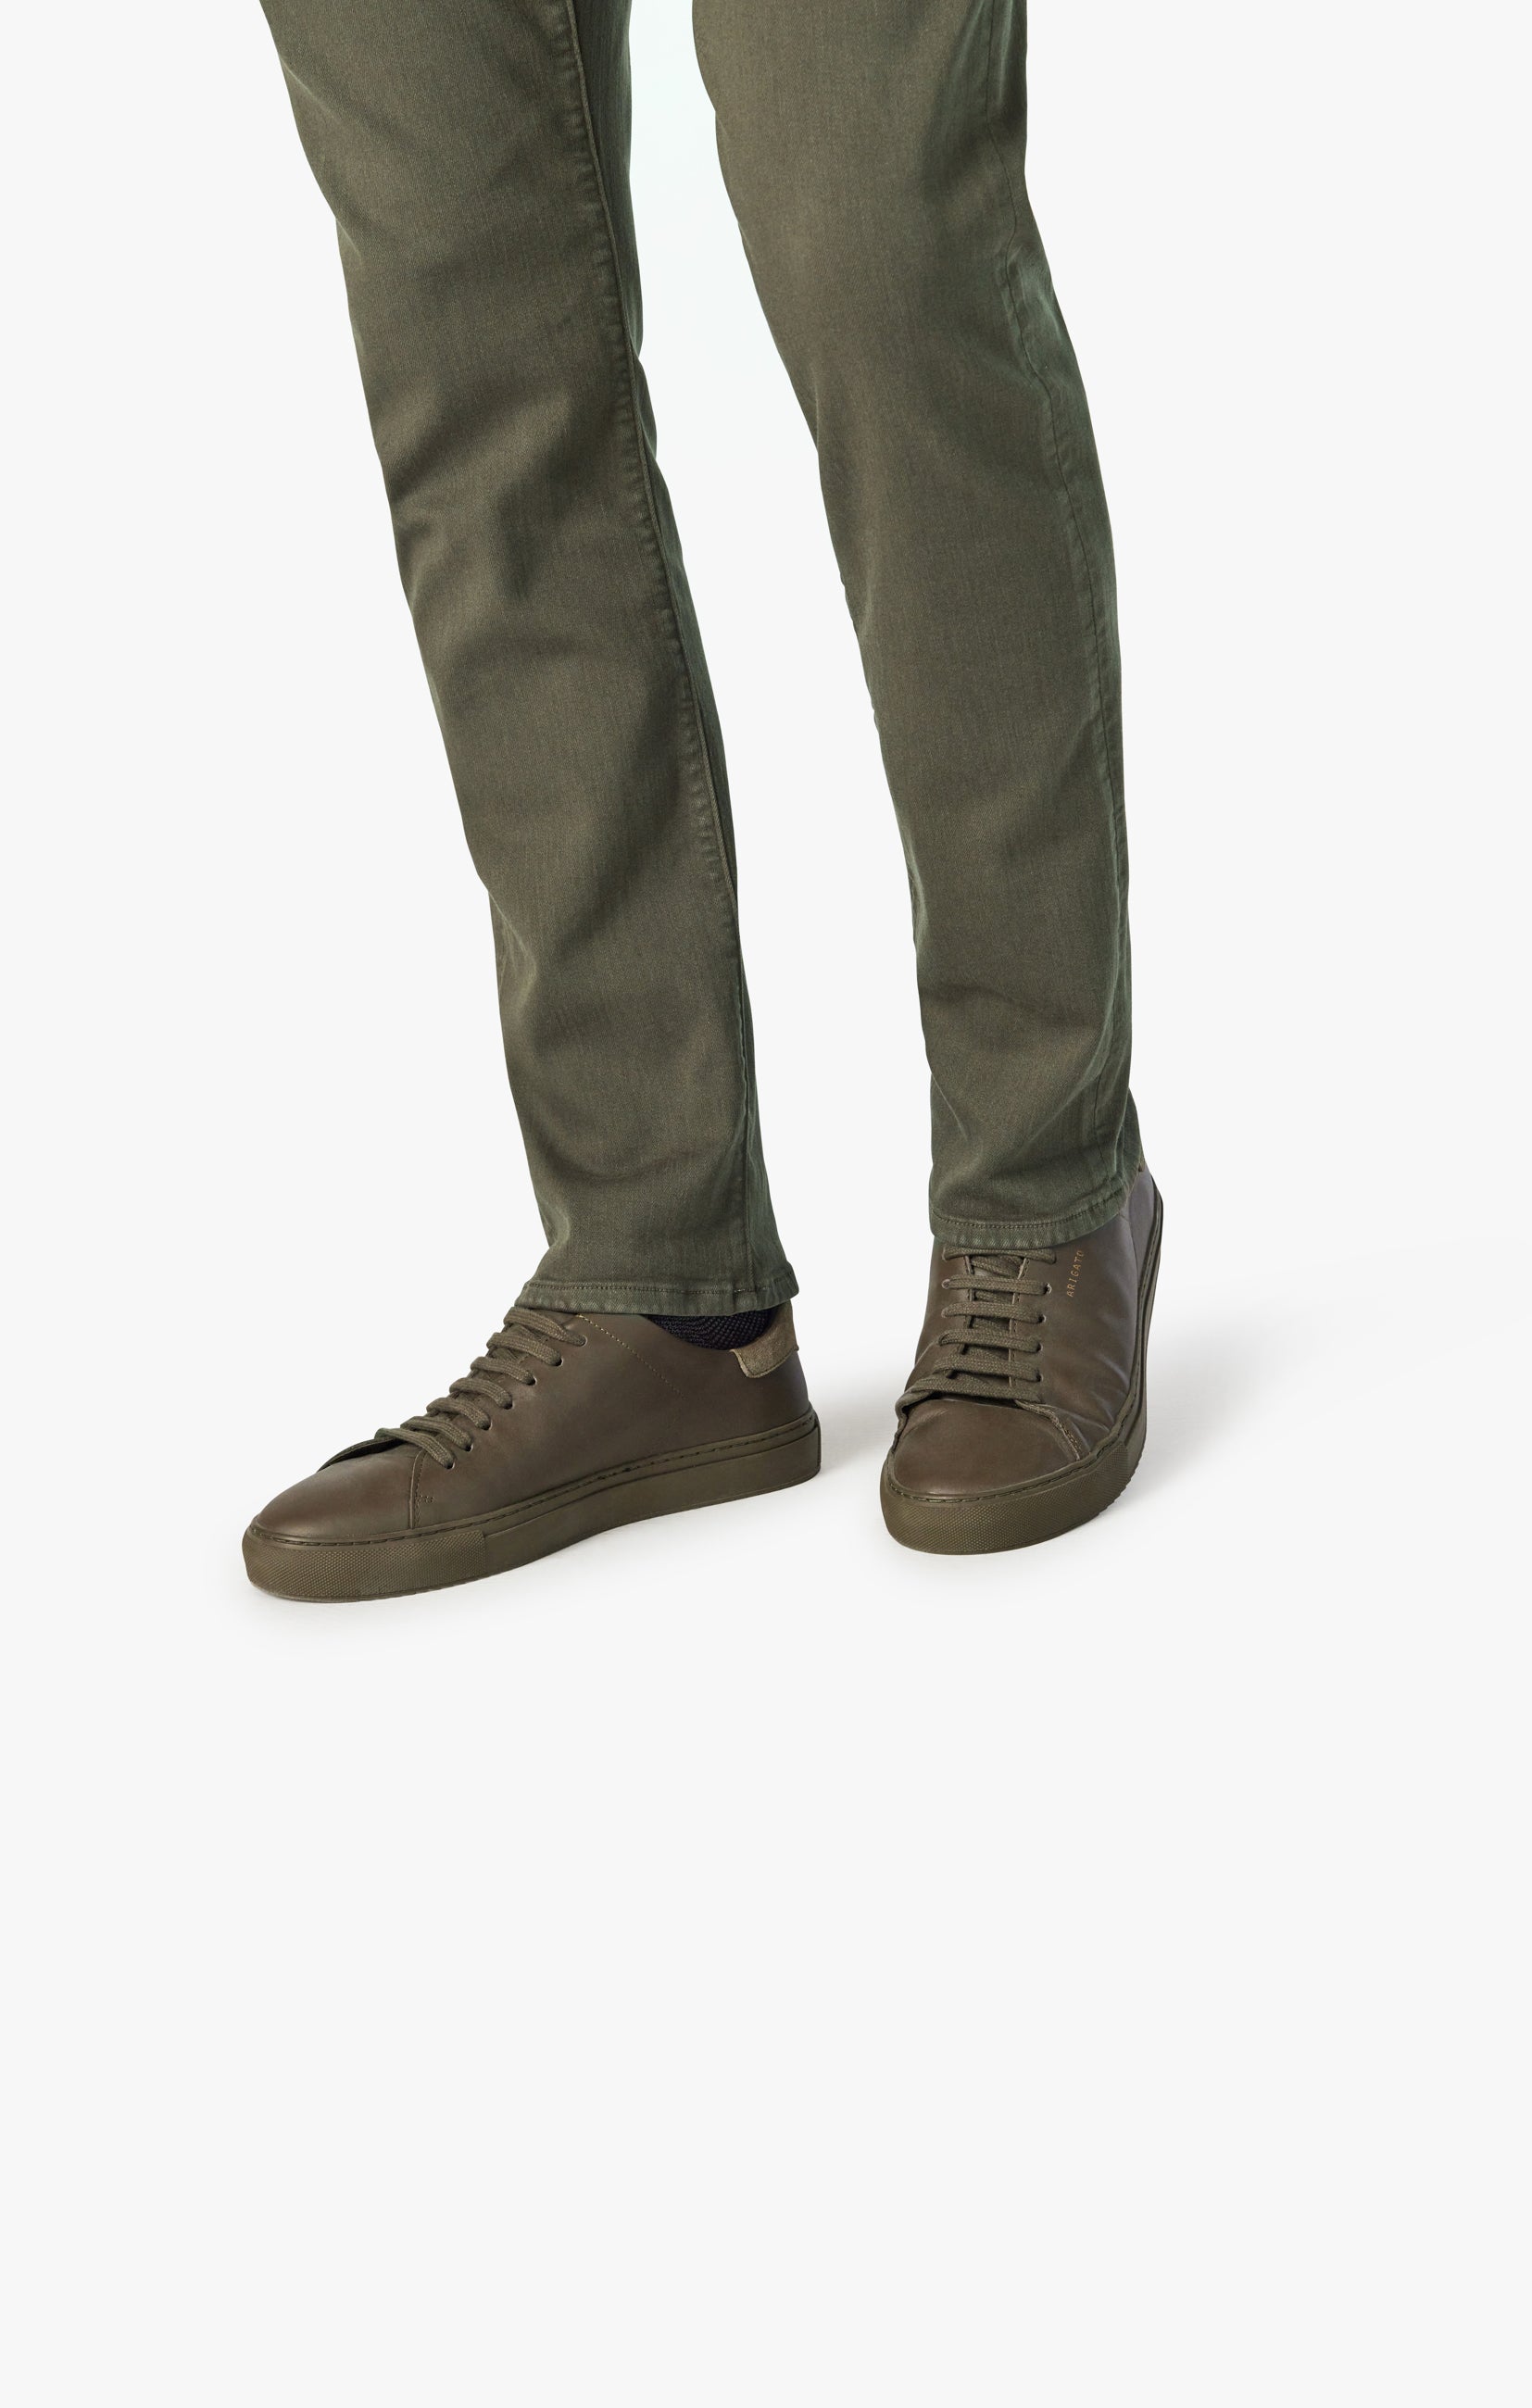 Charisma Classic Fit Pants in Green Comfort Image 7